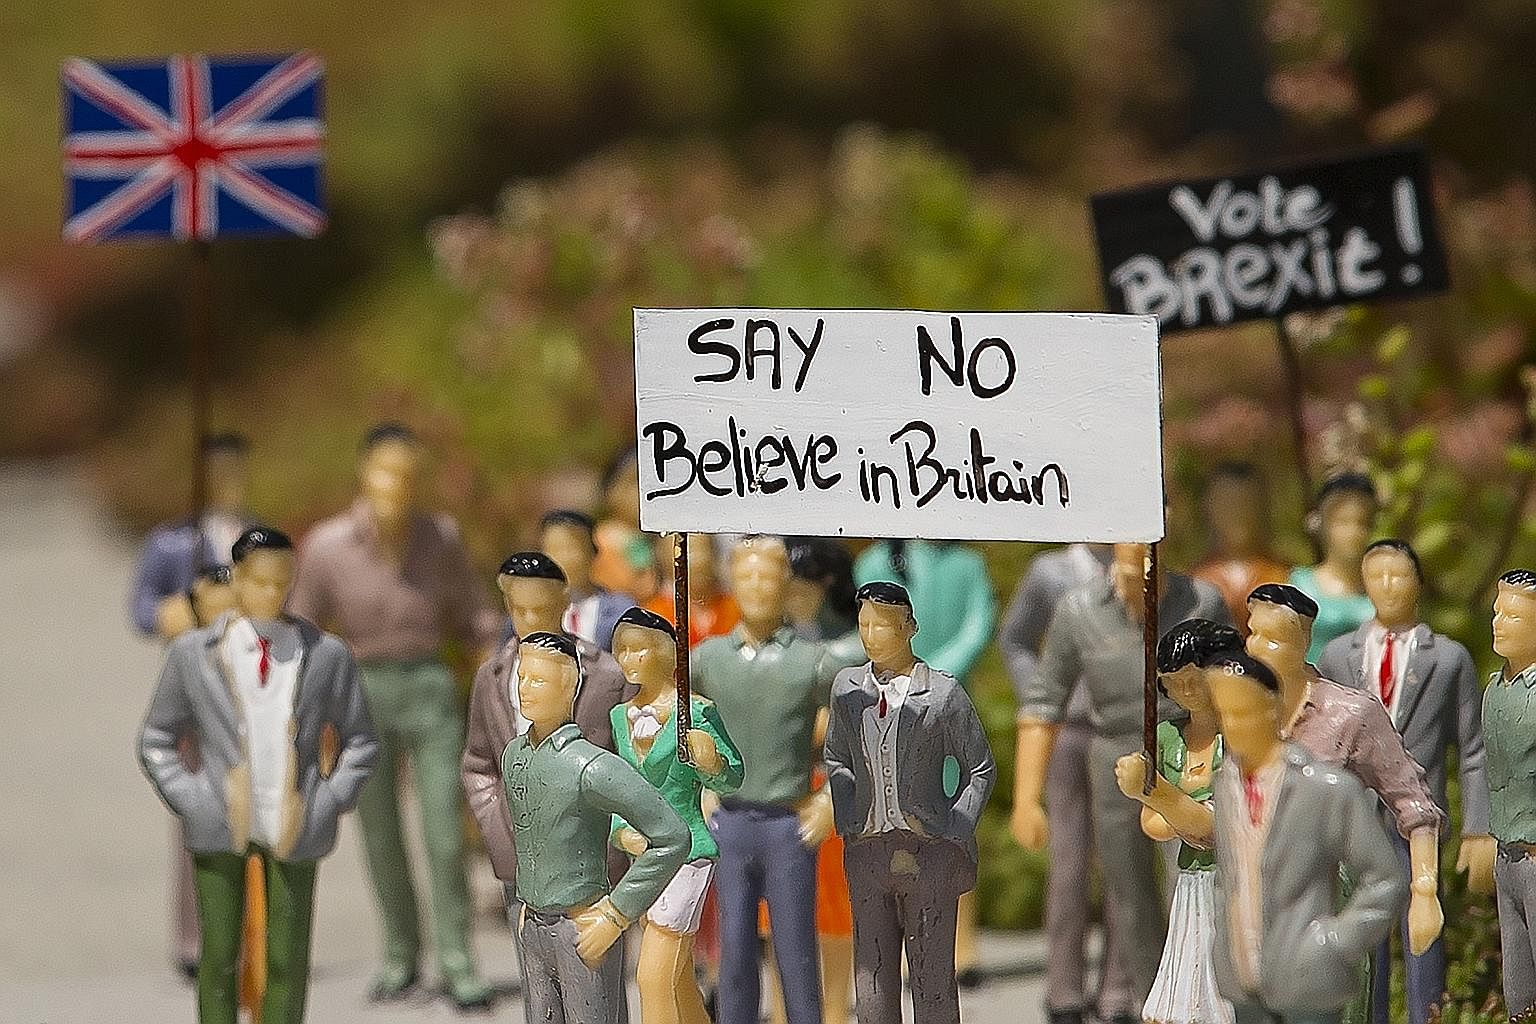 Miniature figures representing the debate for Britain leaving the EU on display at the Mini Europe theme park in Brussels, Belgium.